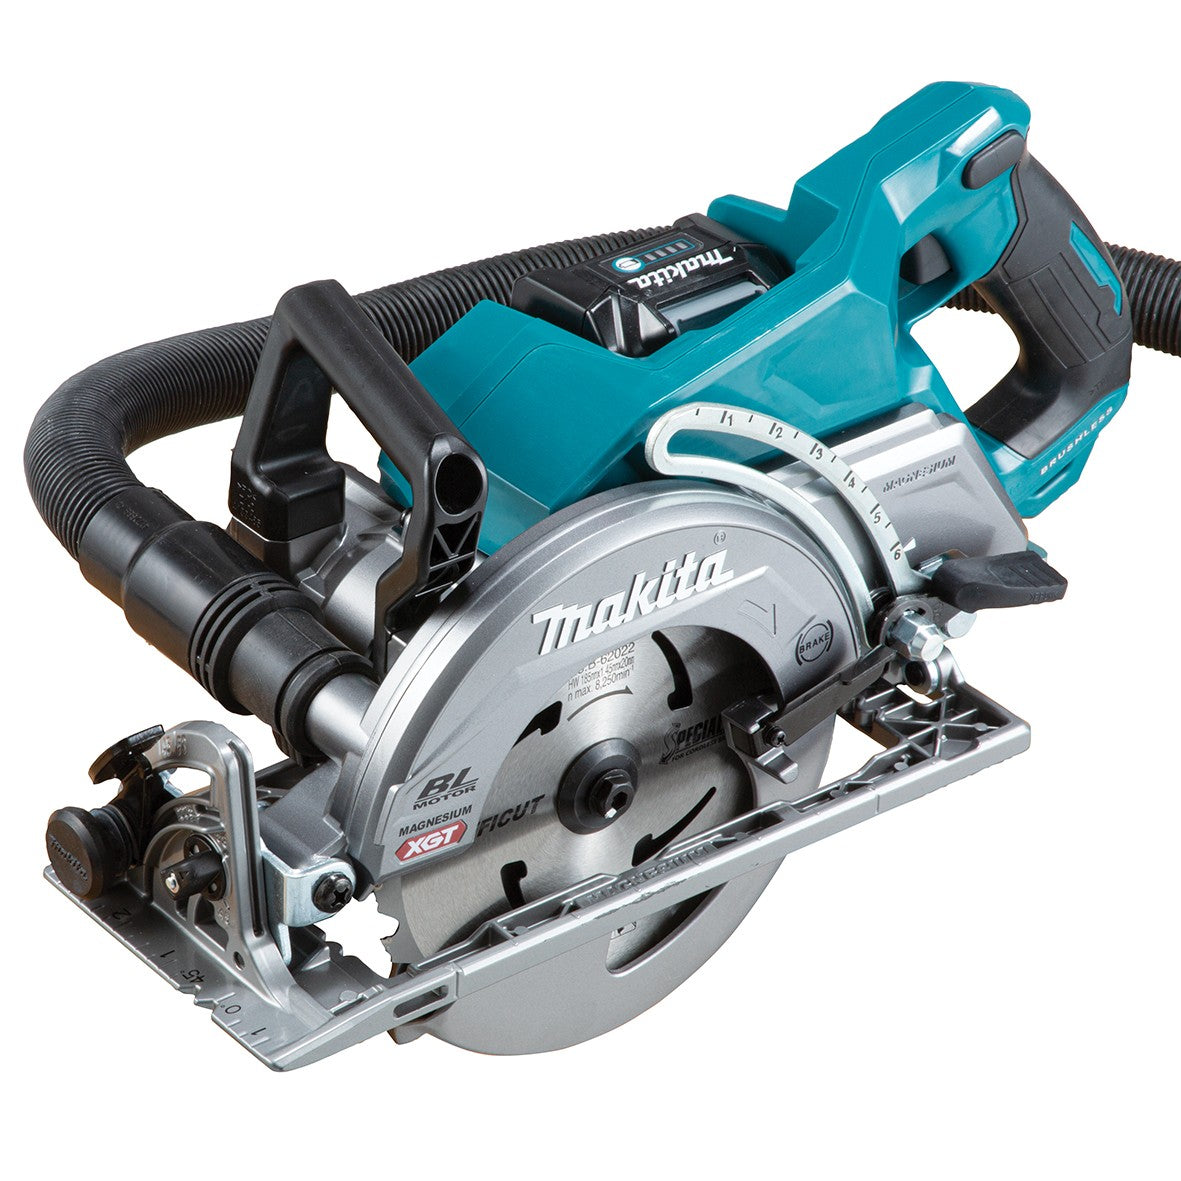 40V 185mm (7-1/4") Brushless Rear Handle Saw Bare (Tool Only) RS001GZ by Makita